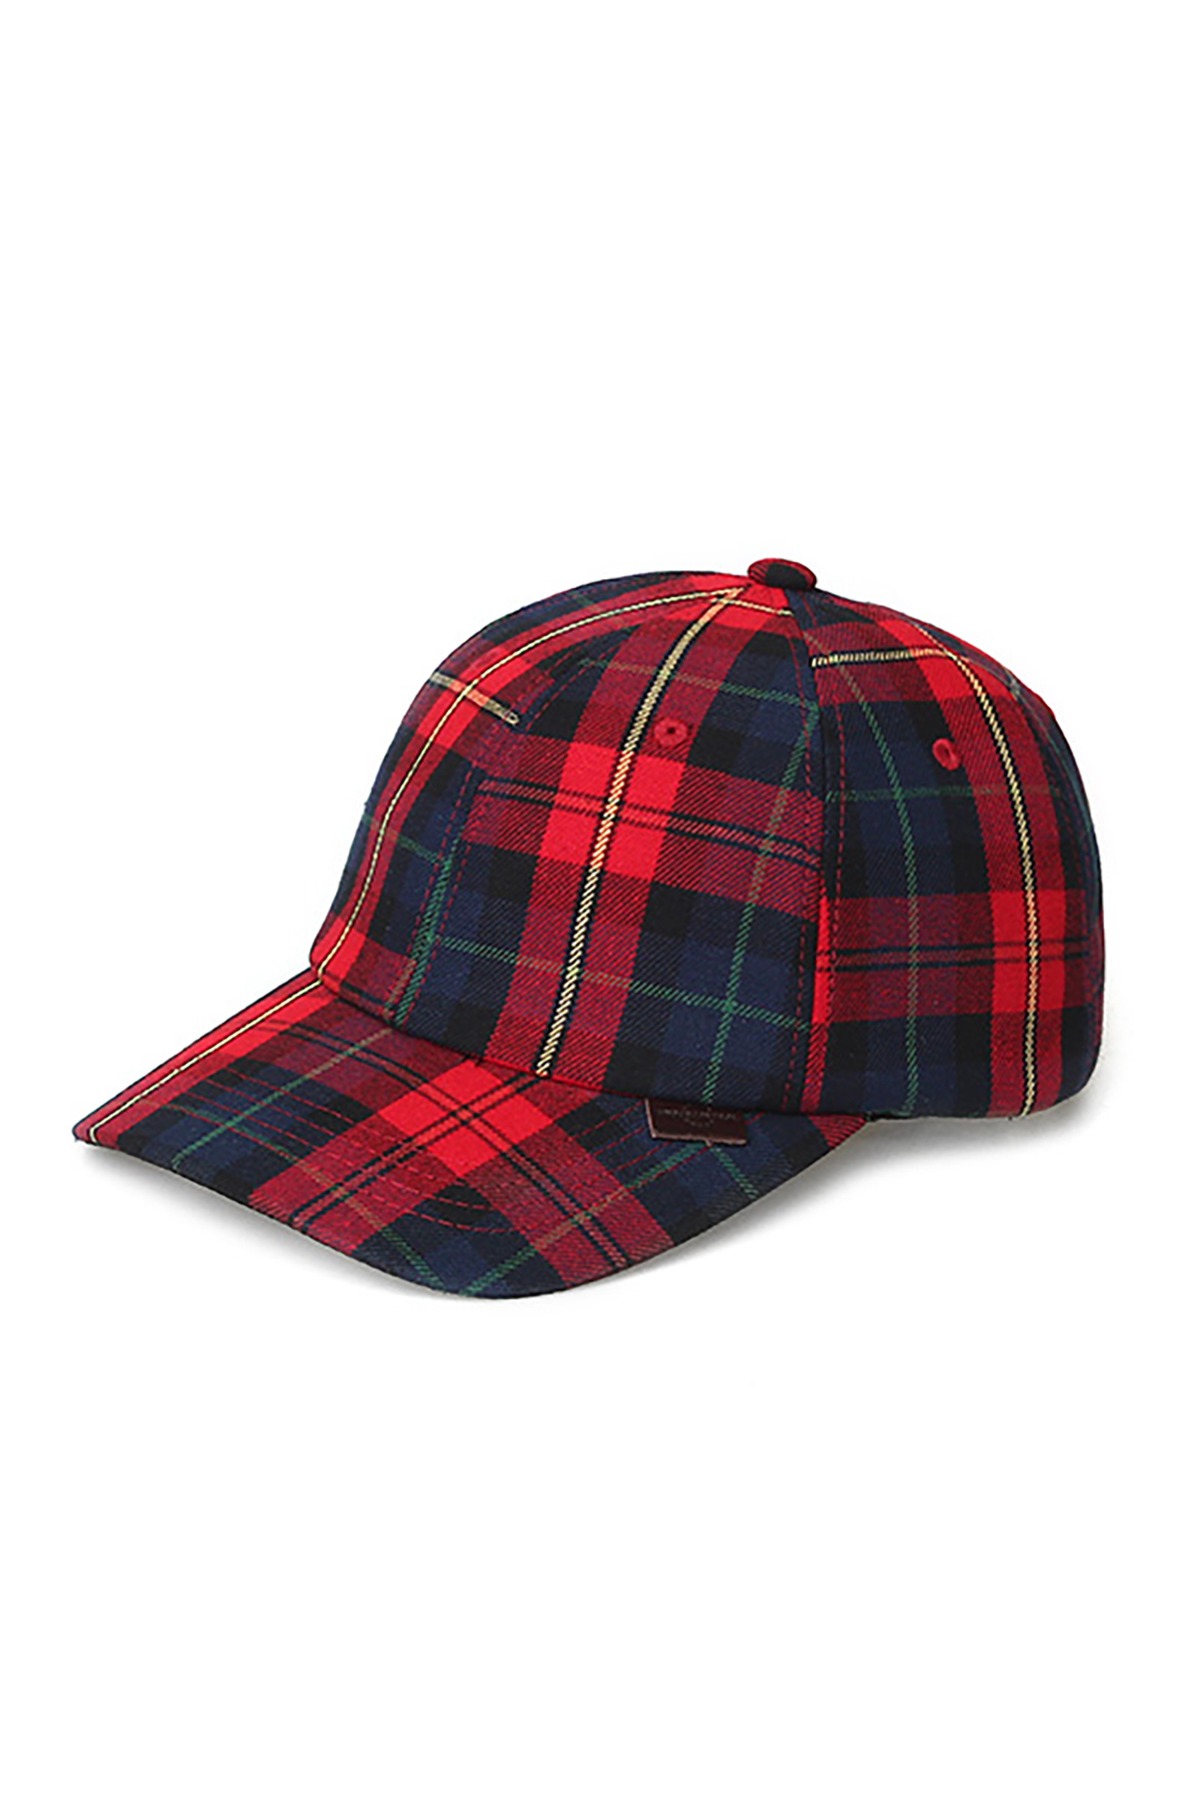 FLANNEL PACK / CLASSIC B B / RED CHECK